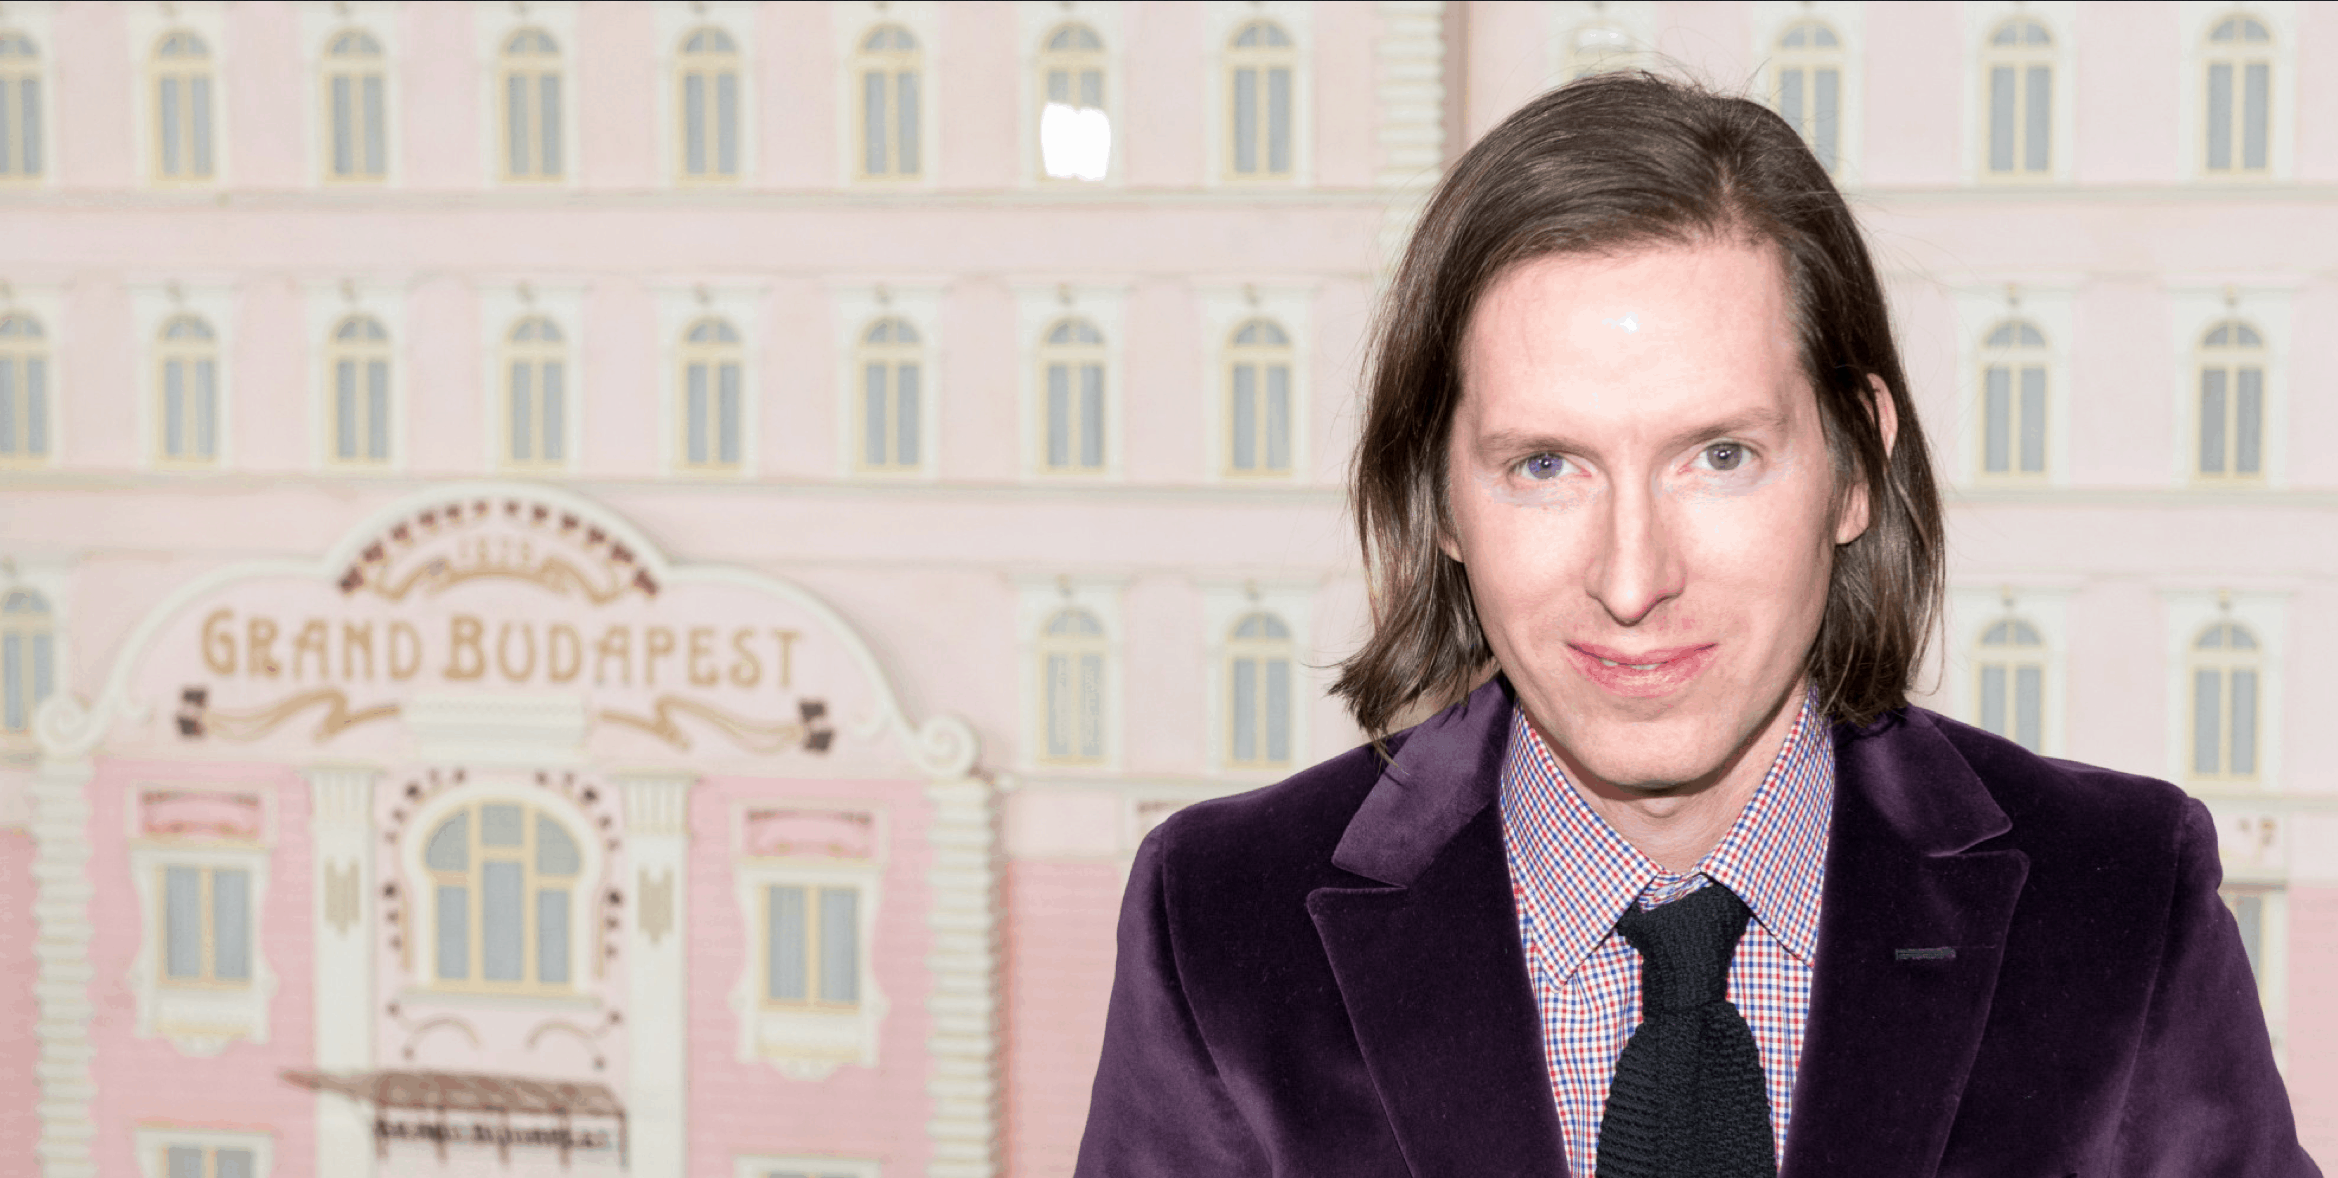 Wes Anderson reveals he'd consider Rushmore and Darjeeling Limited